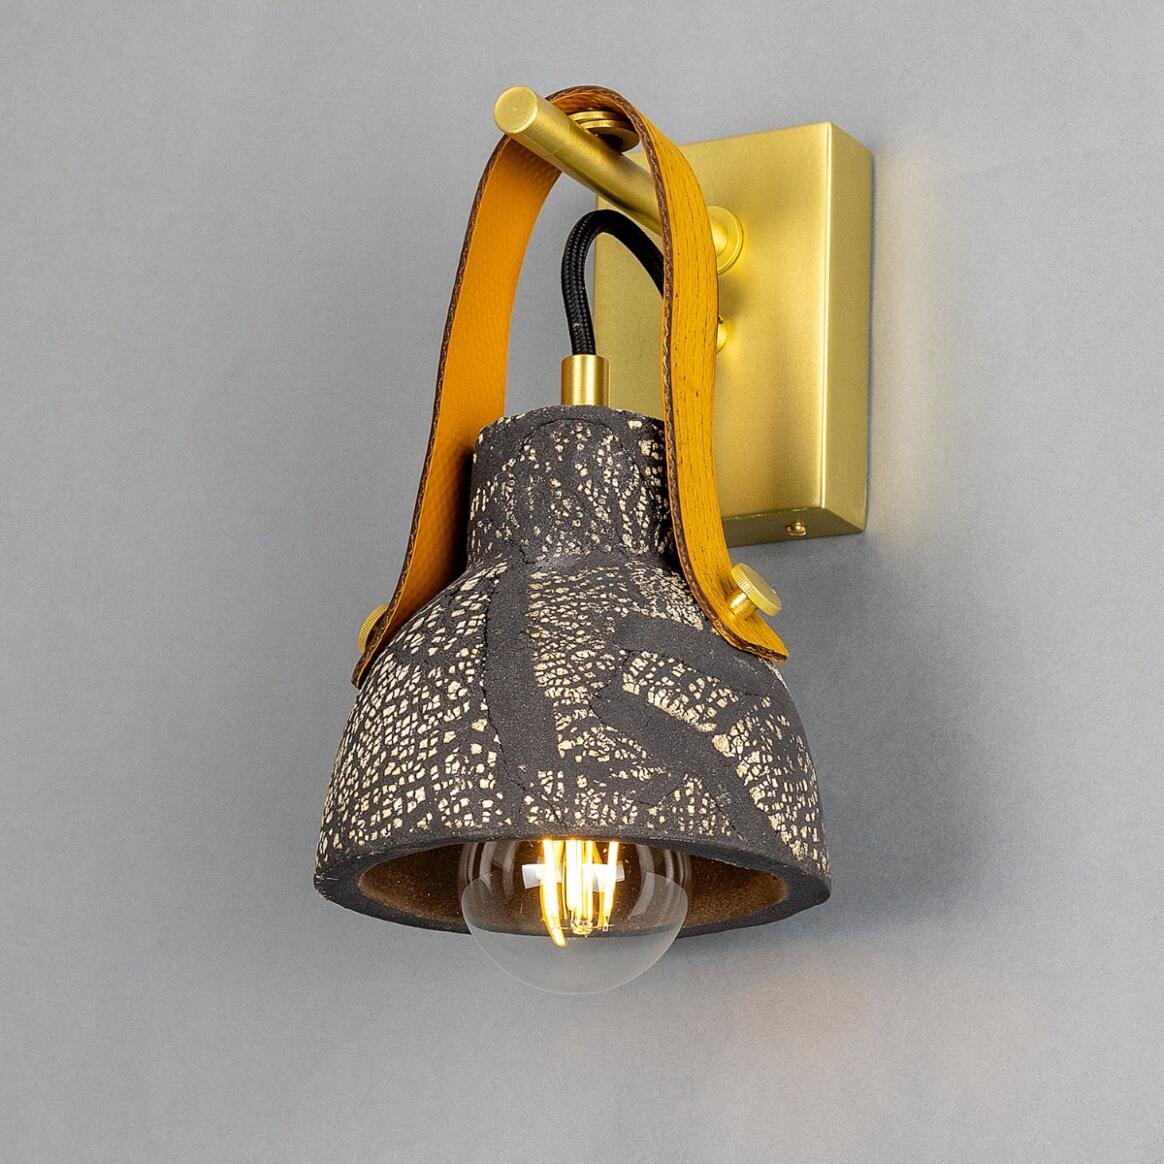 Nagi Organic Ceramic Wall Light with Rescued Fire-Hose Strap, Black Clay main product image